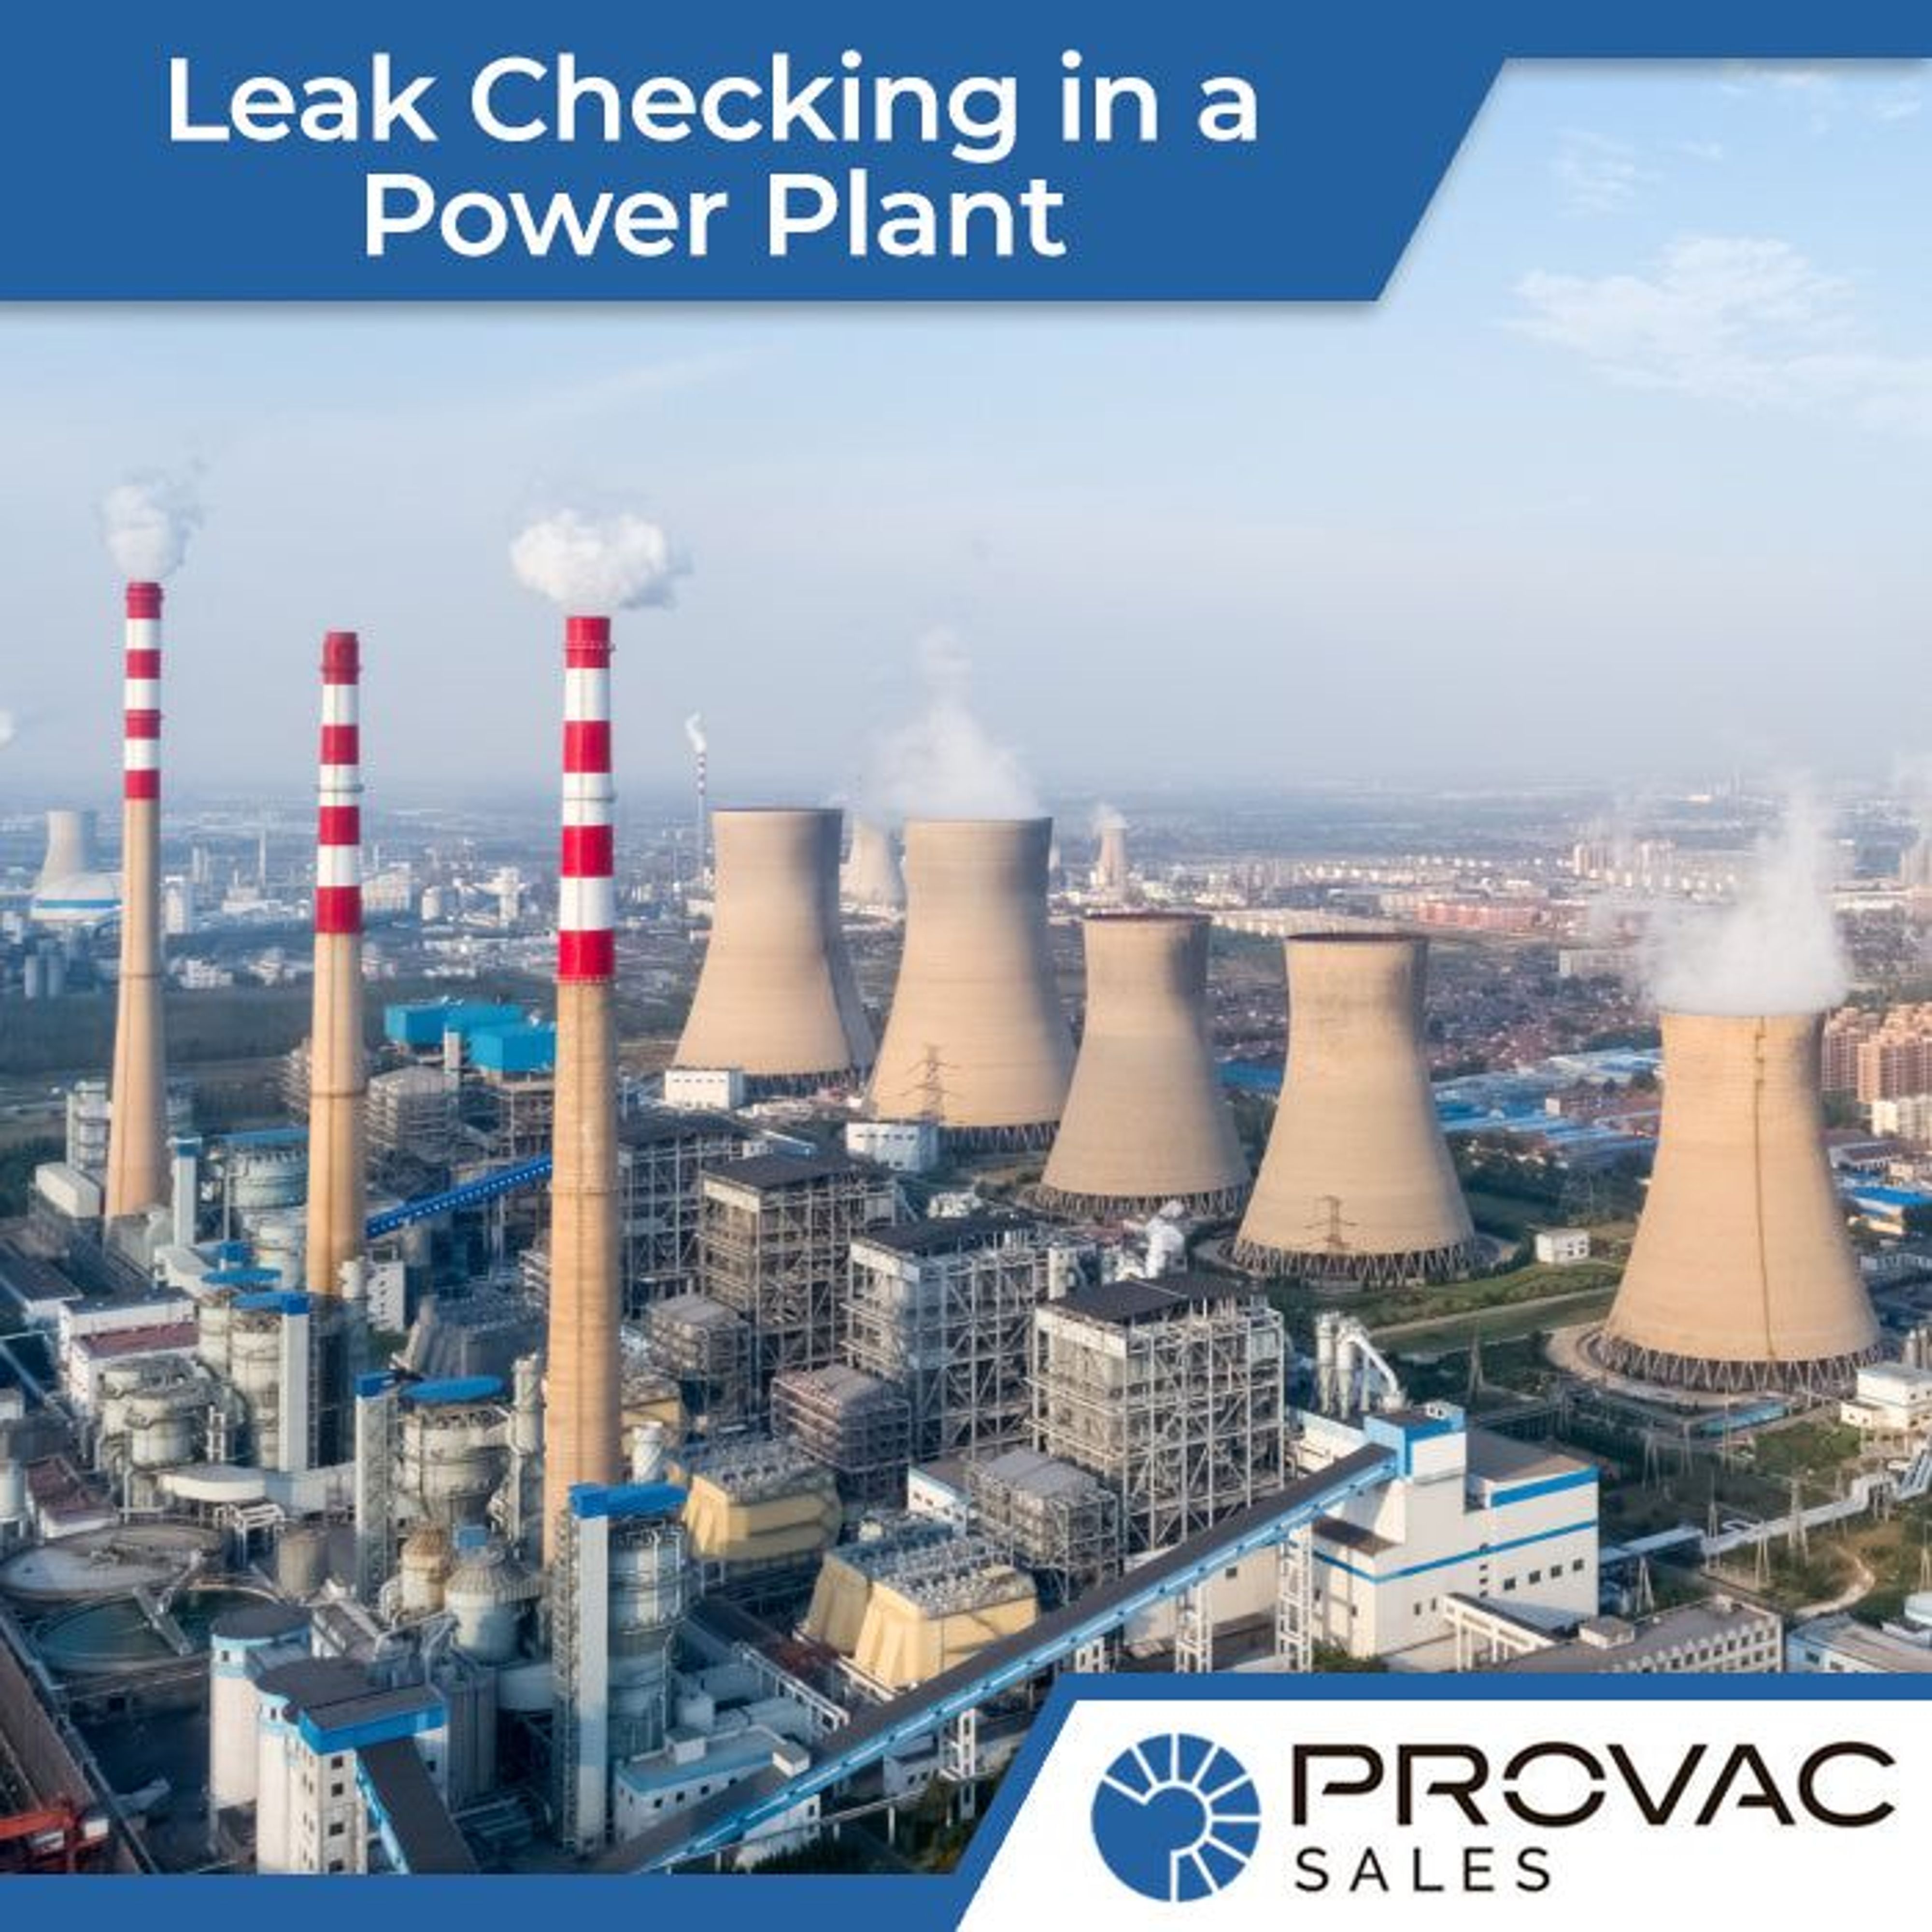 Leak Checking to Save Energy in a Power Plant Using Vacuum Pumps Background